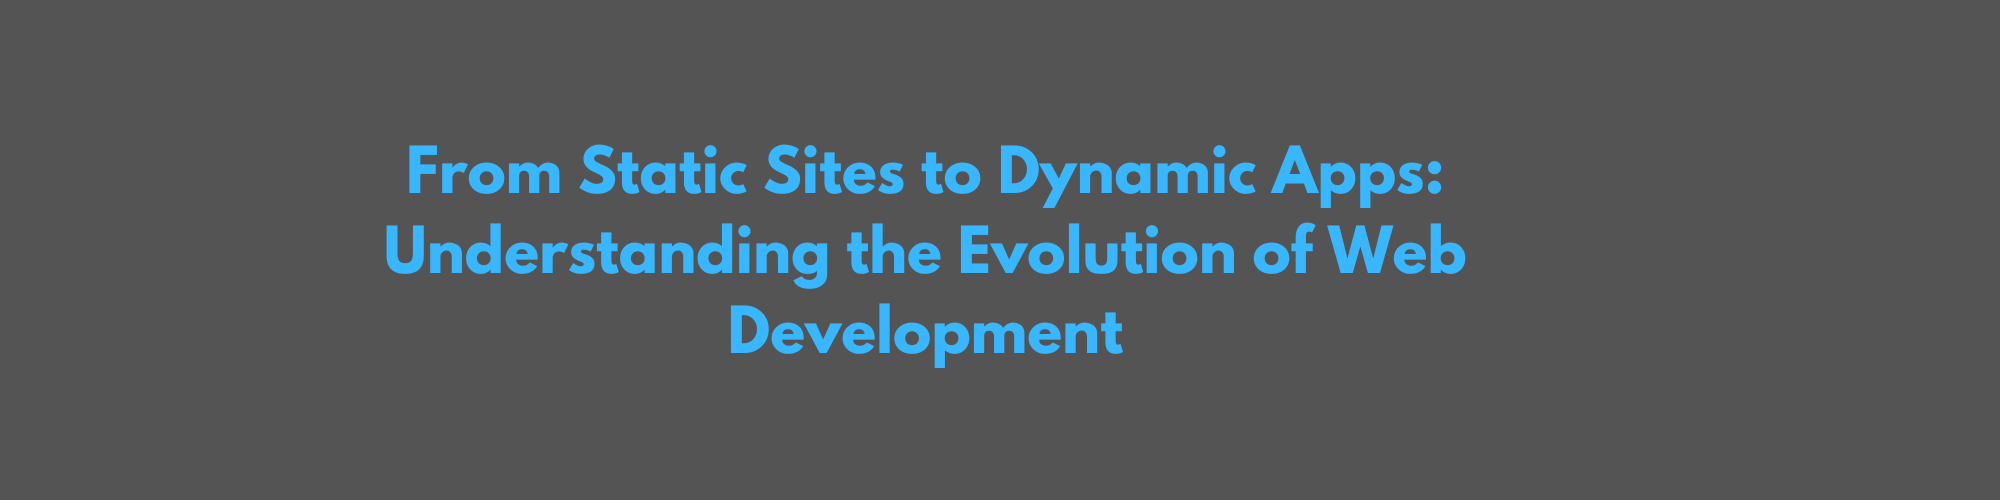 From Static Sites to Dynamic Apps: Understanding the Evolution of Web Development